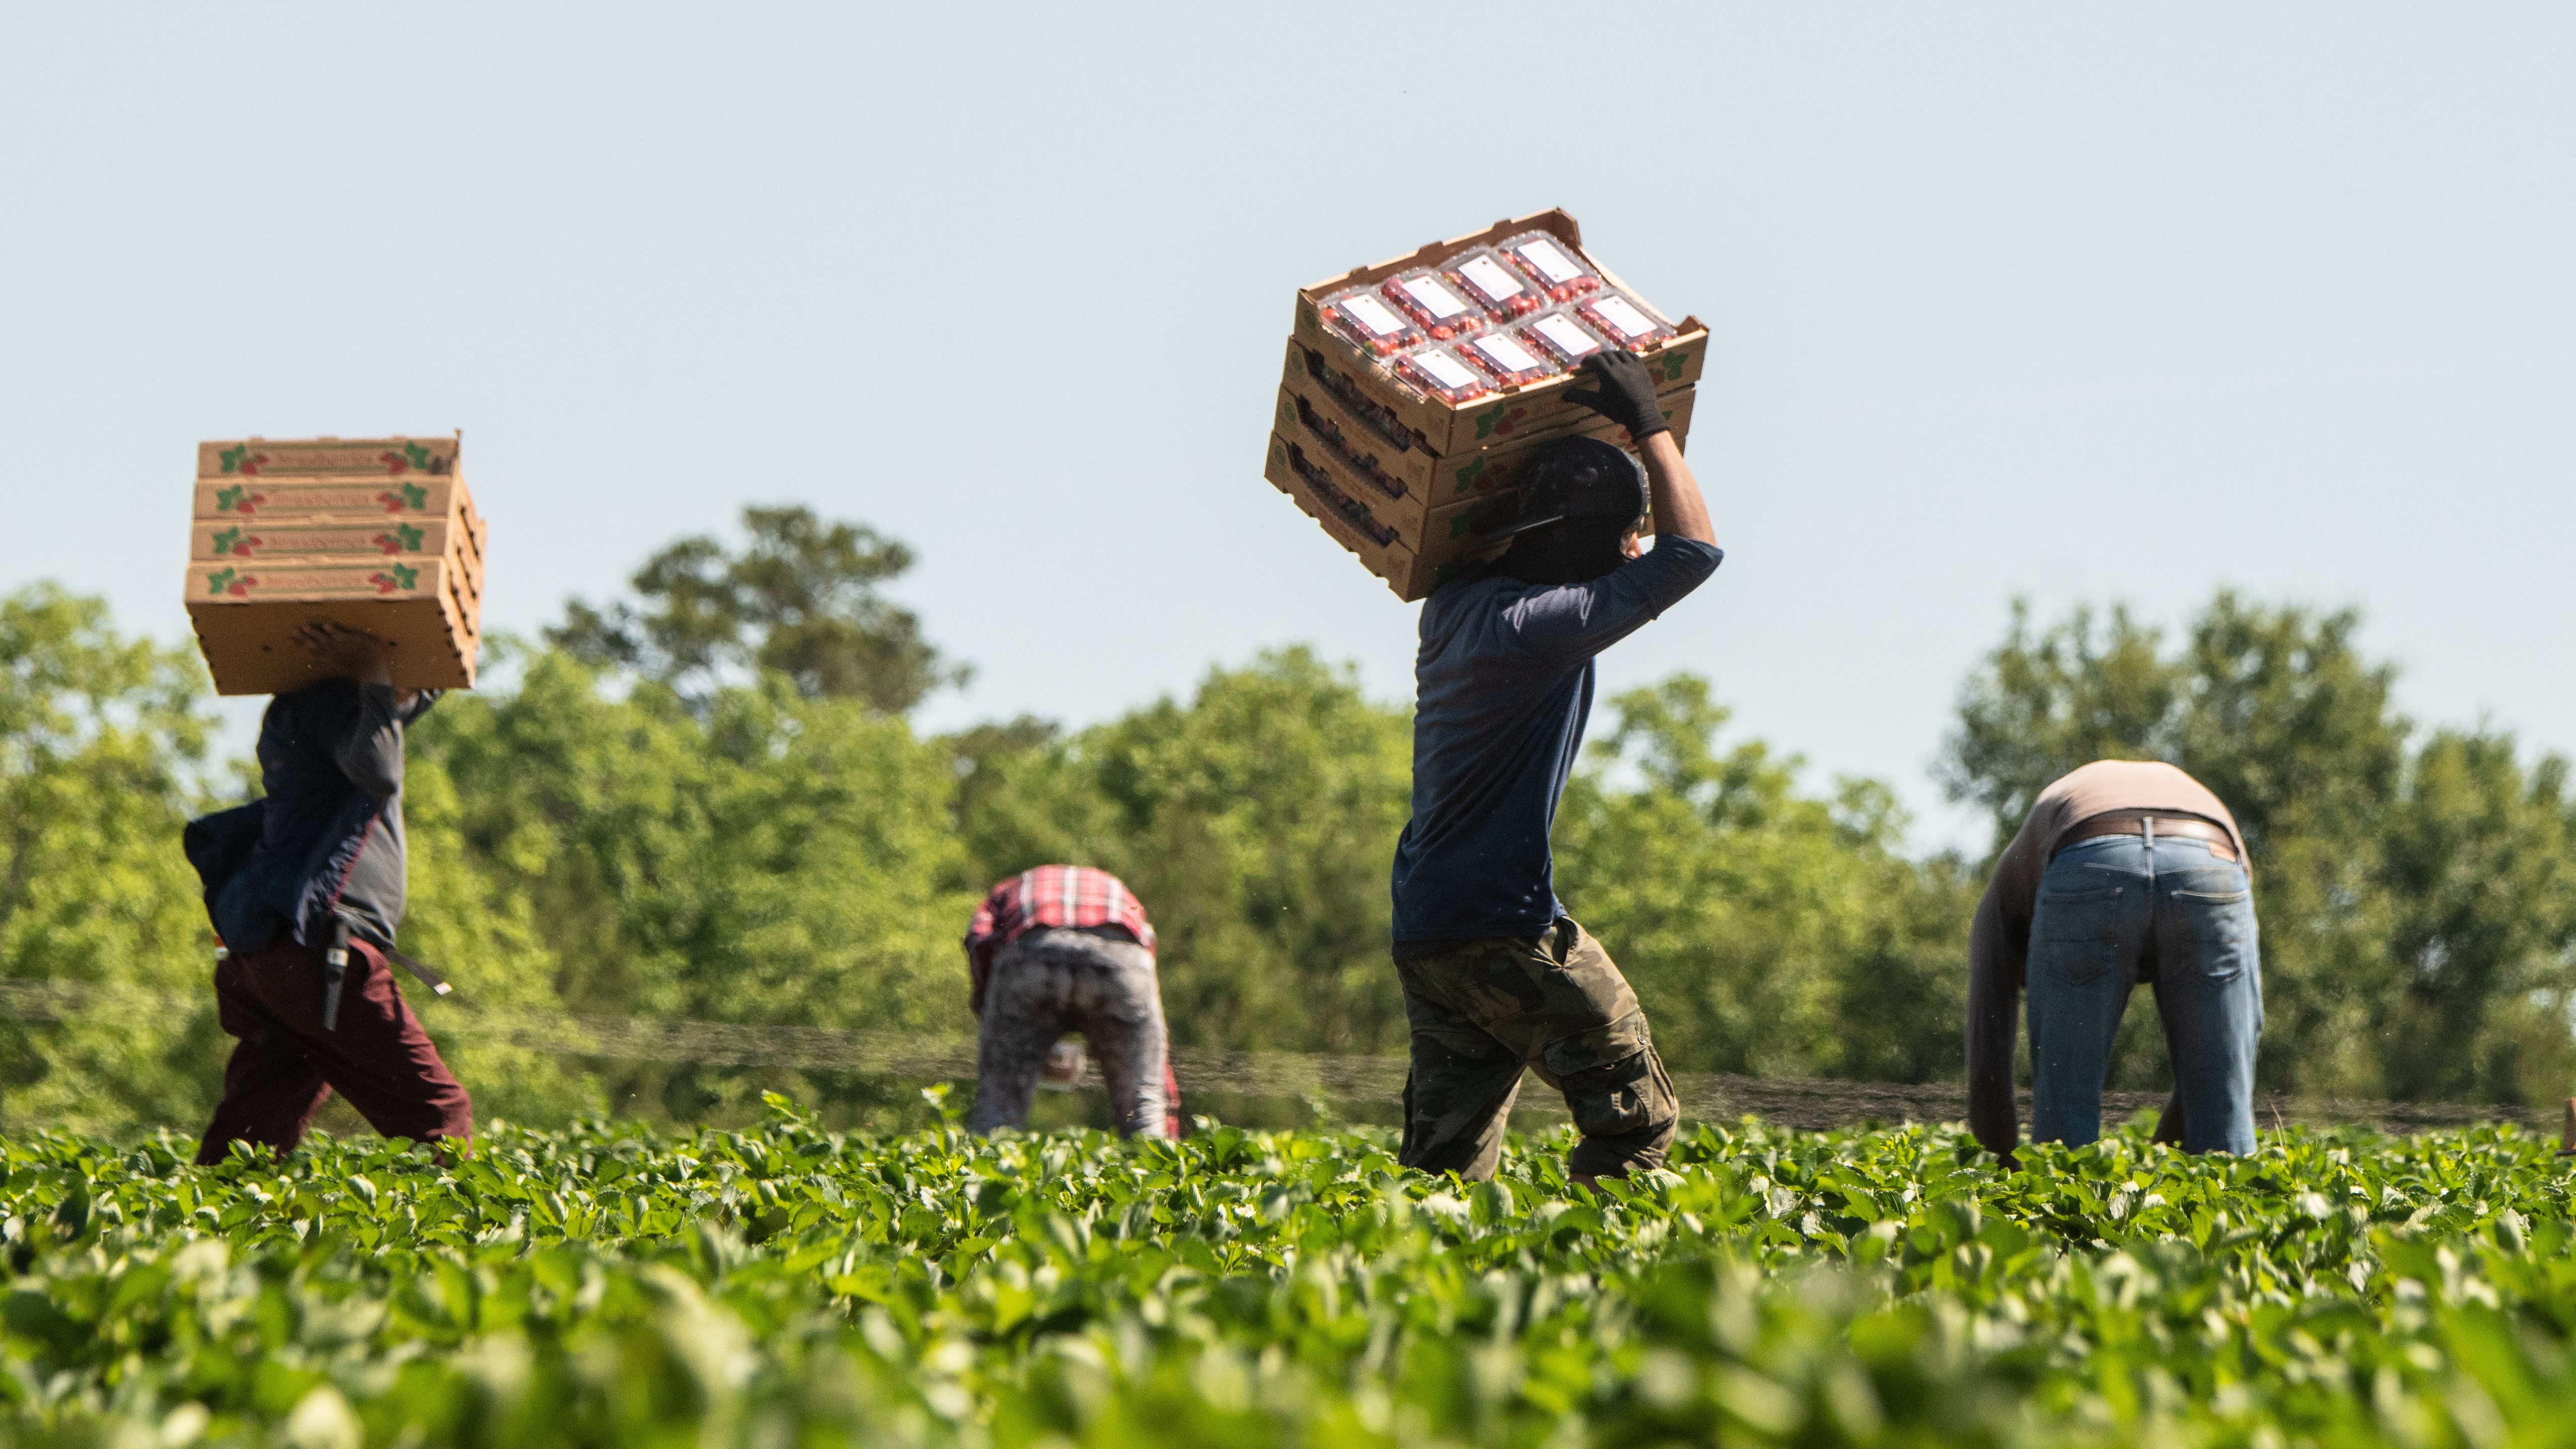 USDA Equity Commission Interim Report: Improving Support for Farmworkers in USDA Programs